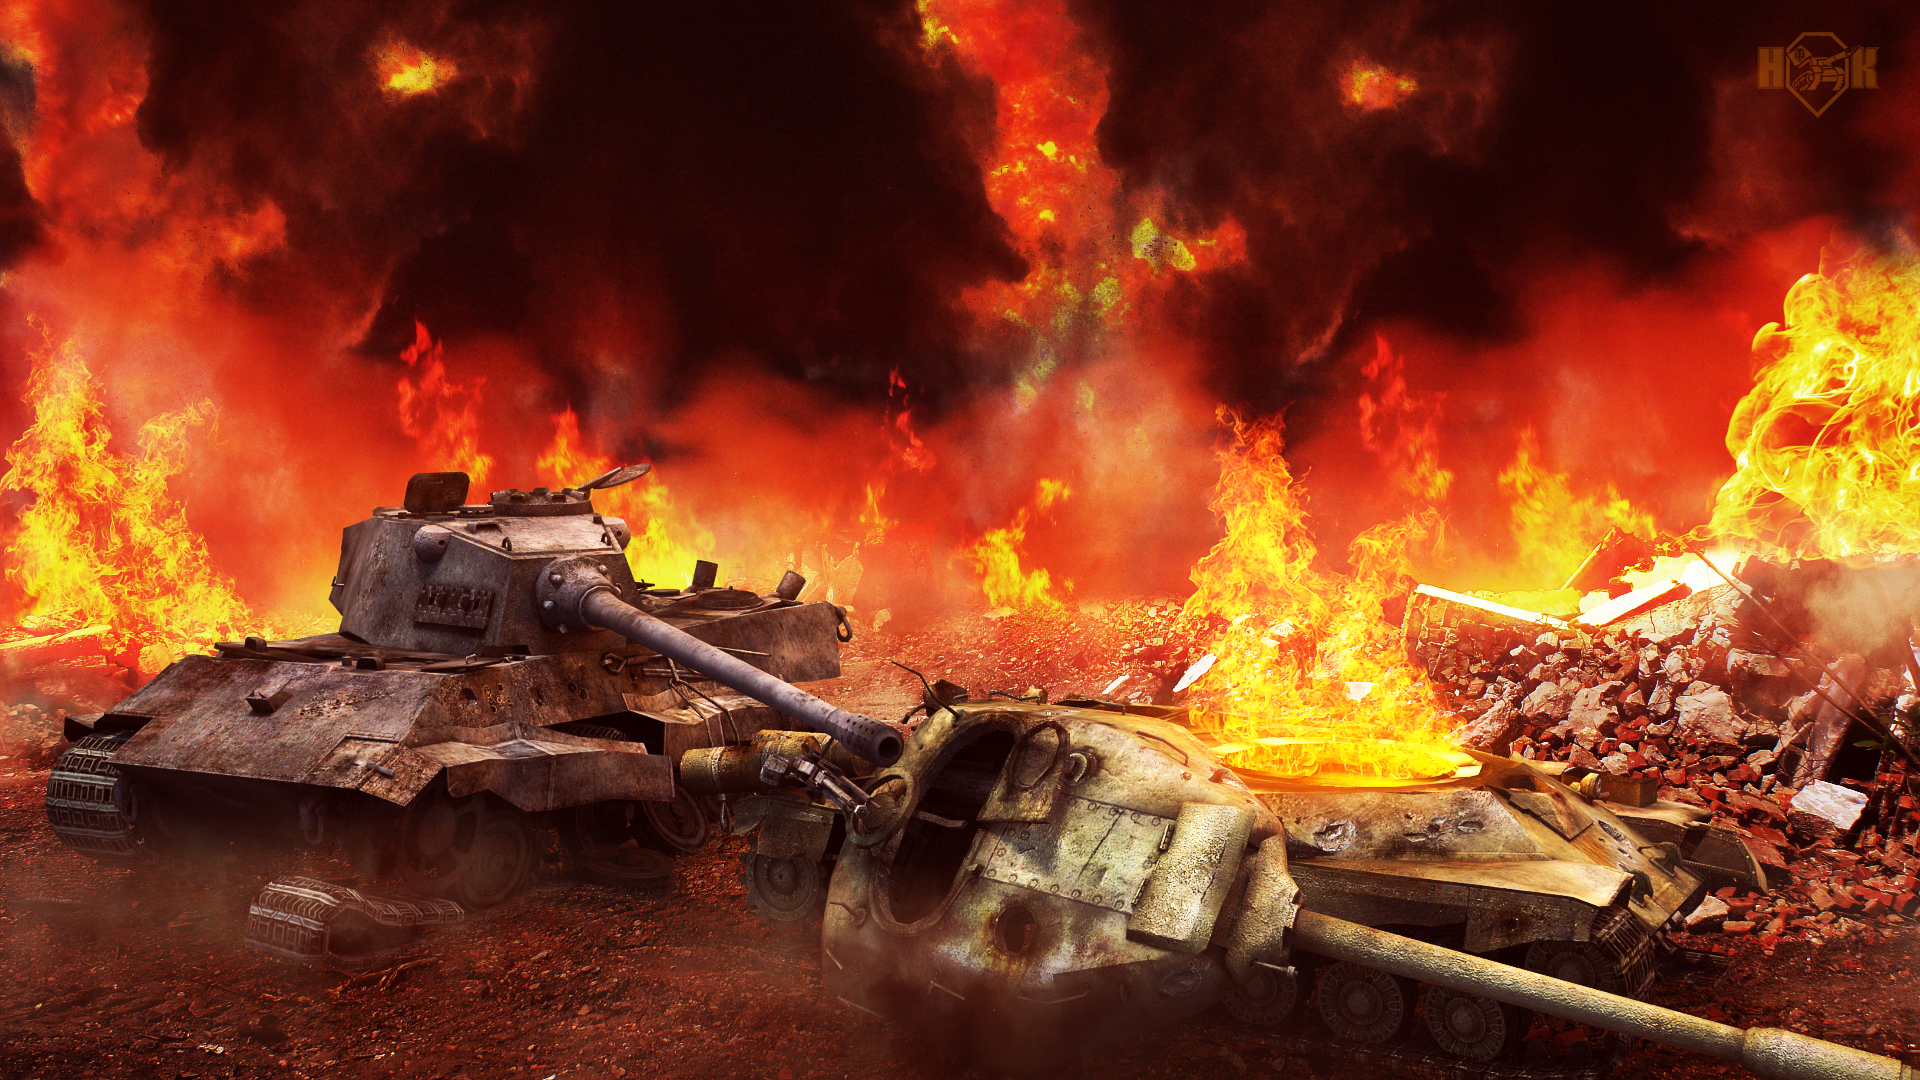 world, Of, Tanks, Military, Weapons, Fire, Destruction Wallpaper